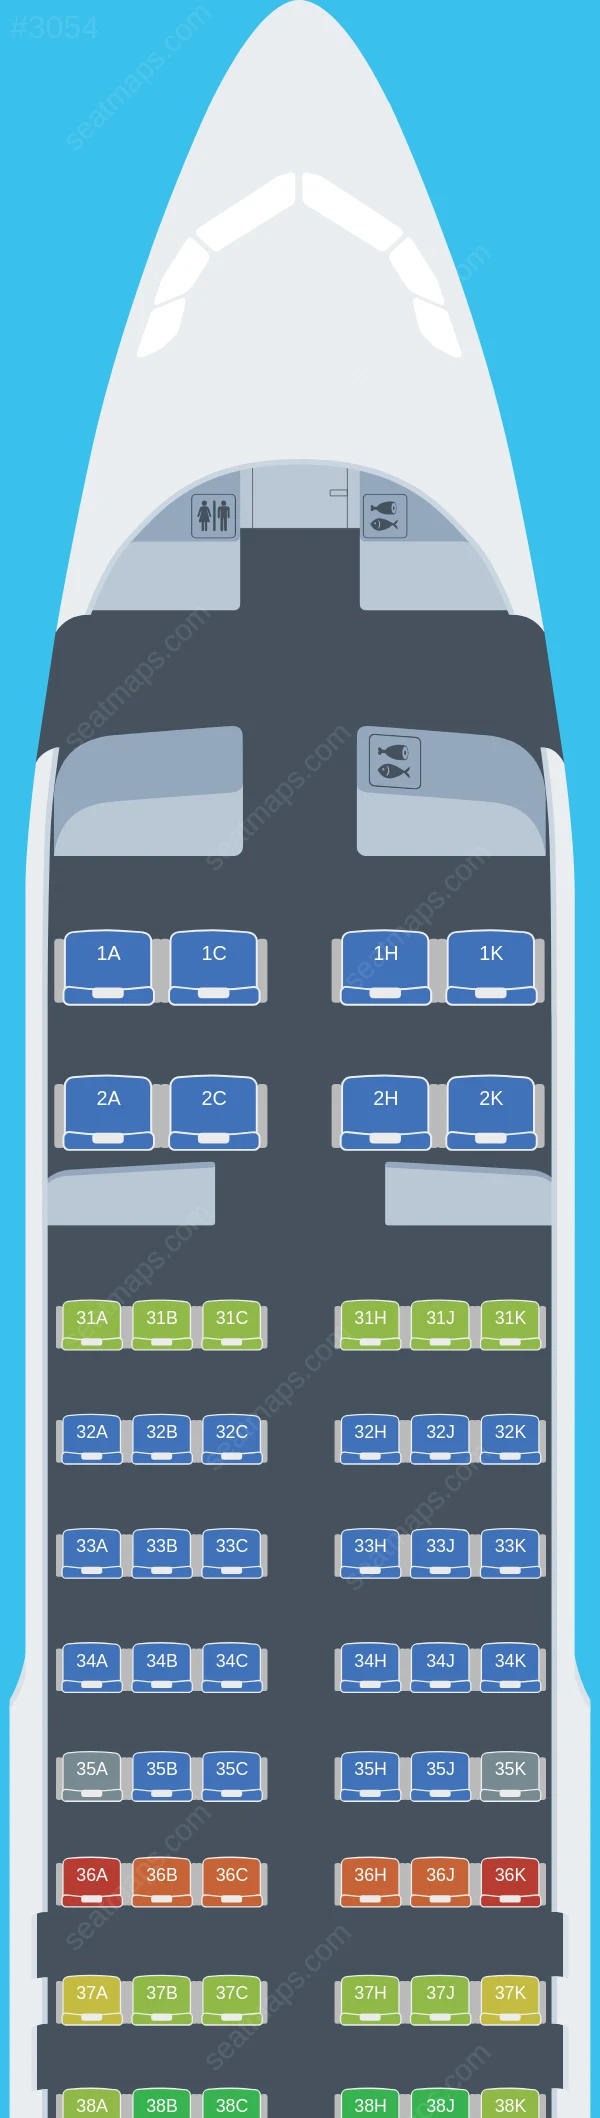 China Southern Airbus A320-200 V.1 seatmap preview